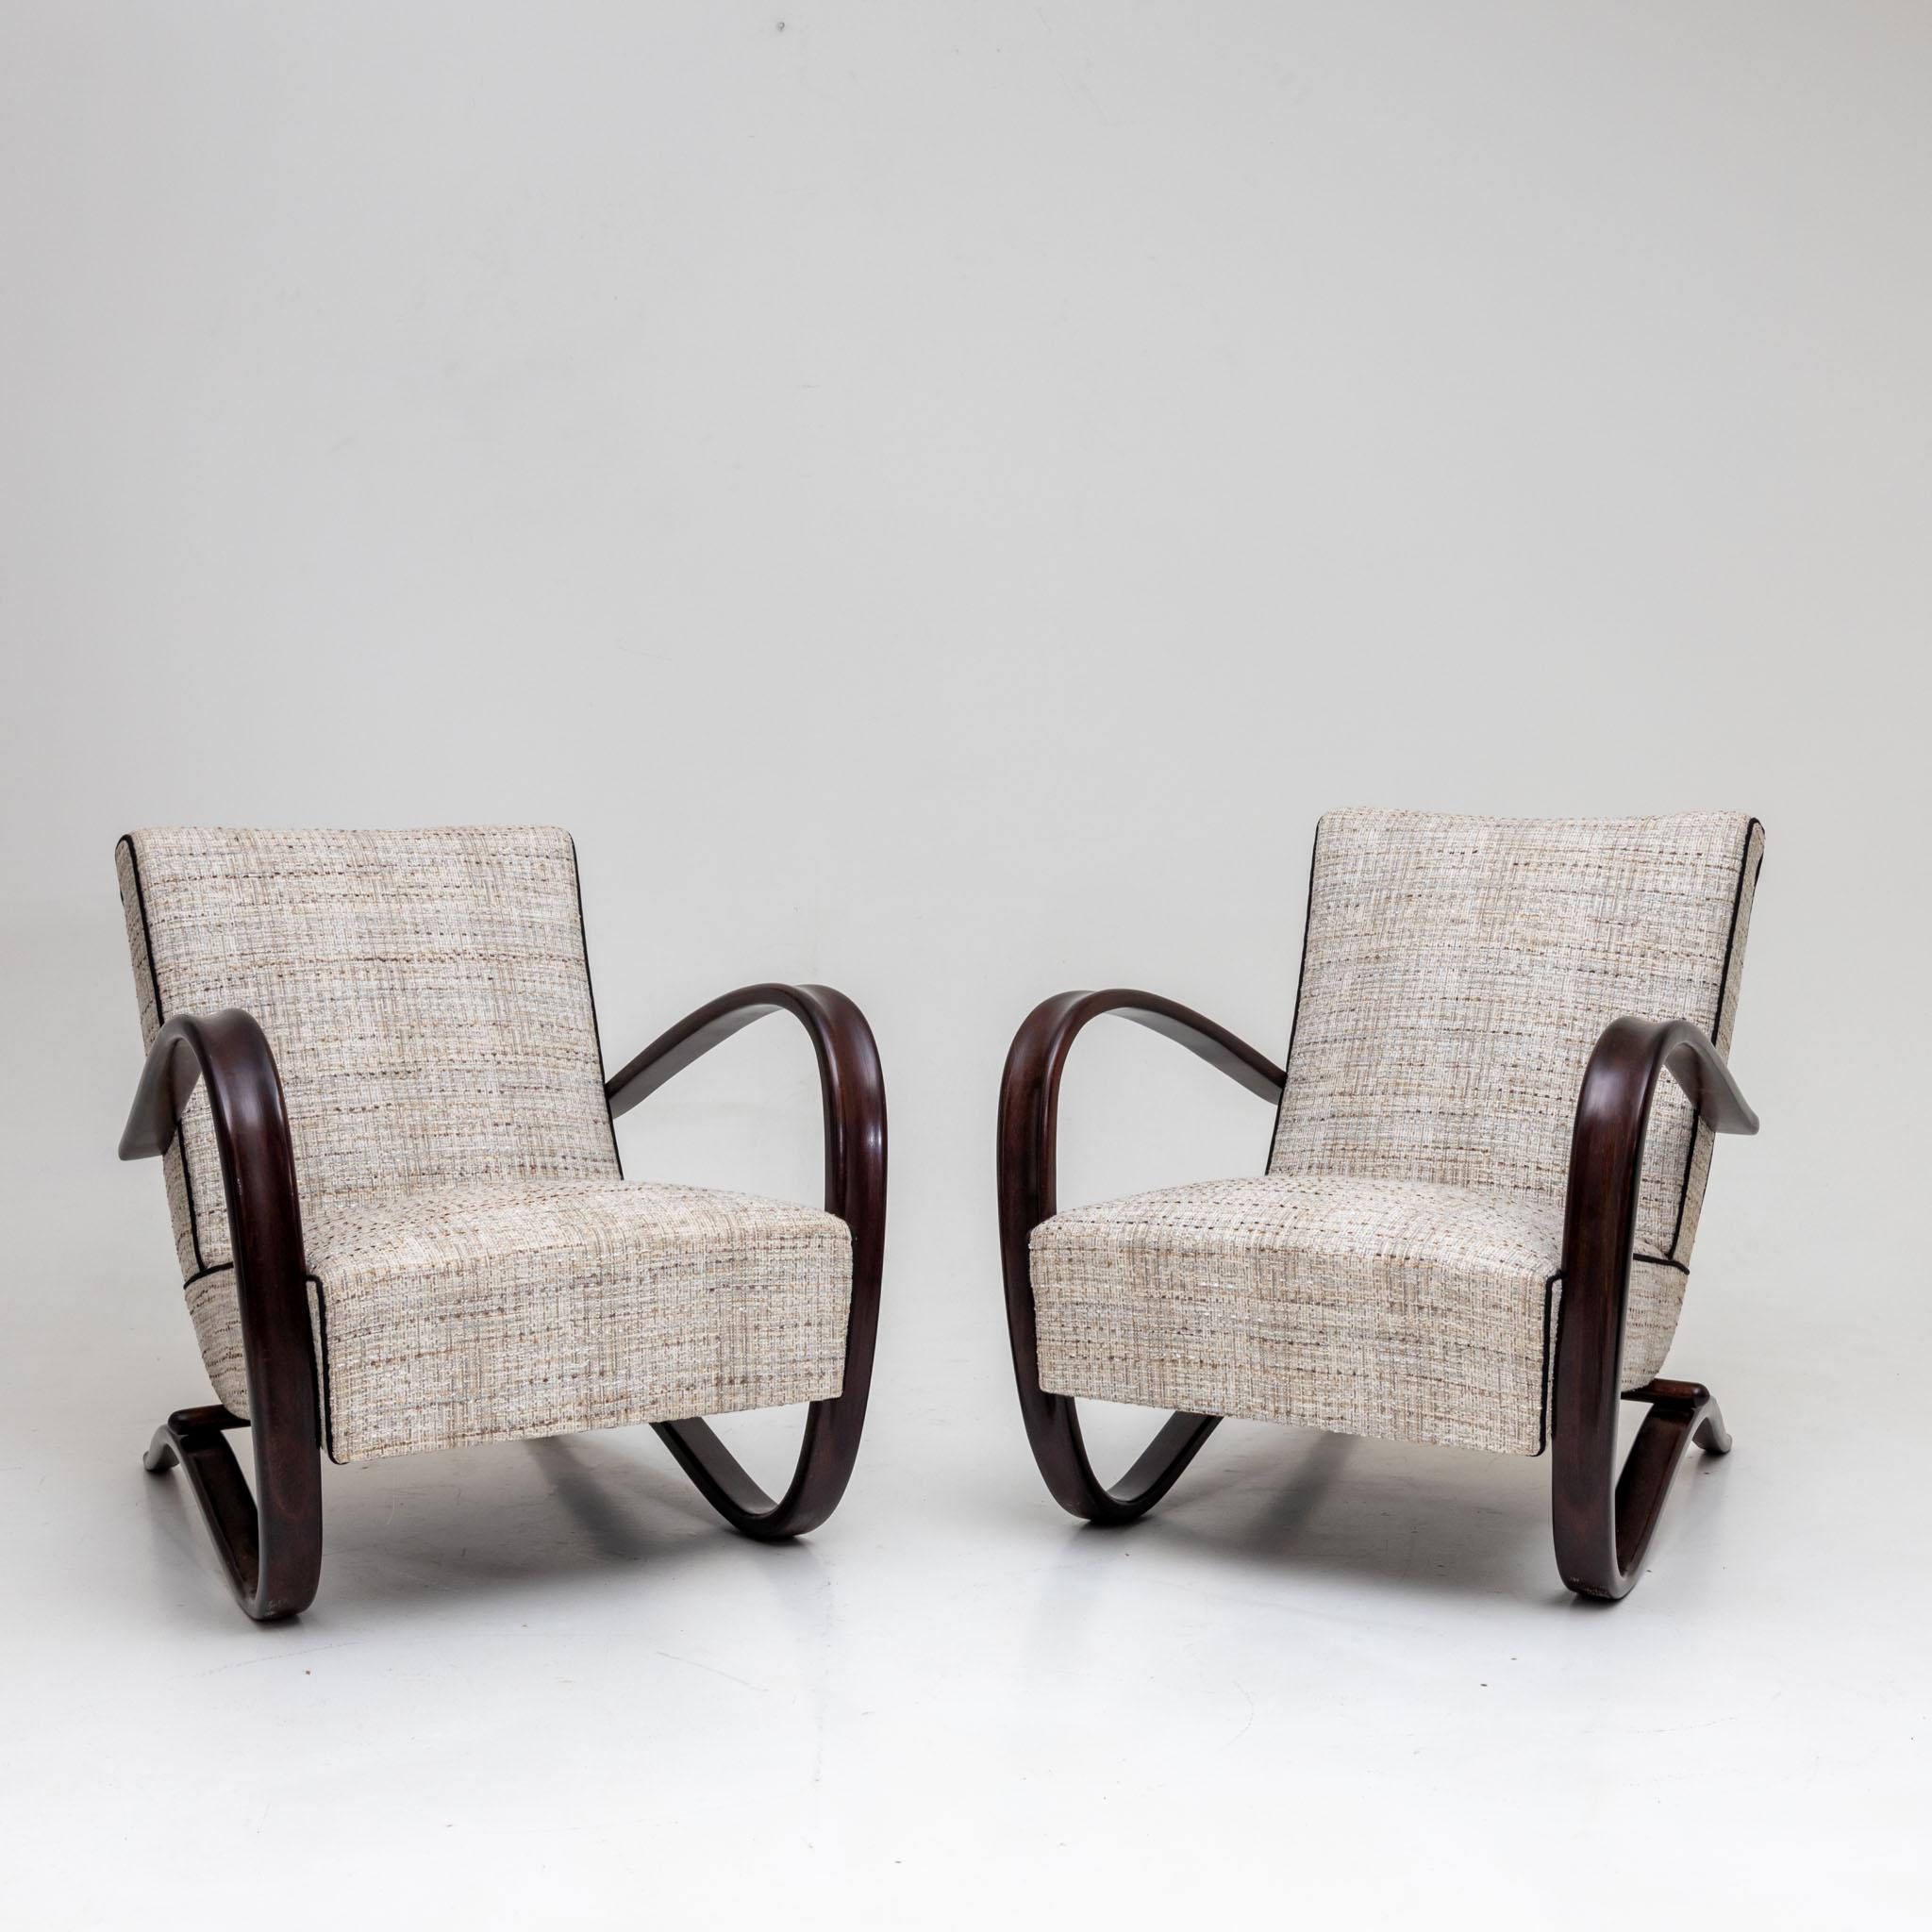 Pair of Halabala armchairs with gray-beige mottled upholstery. The dark stained armrests run in an elegant c-shaped sweep around the side of the seat cushion and become the supporting frame. The chairs have been newly upholstered in a high quality